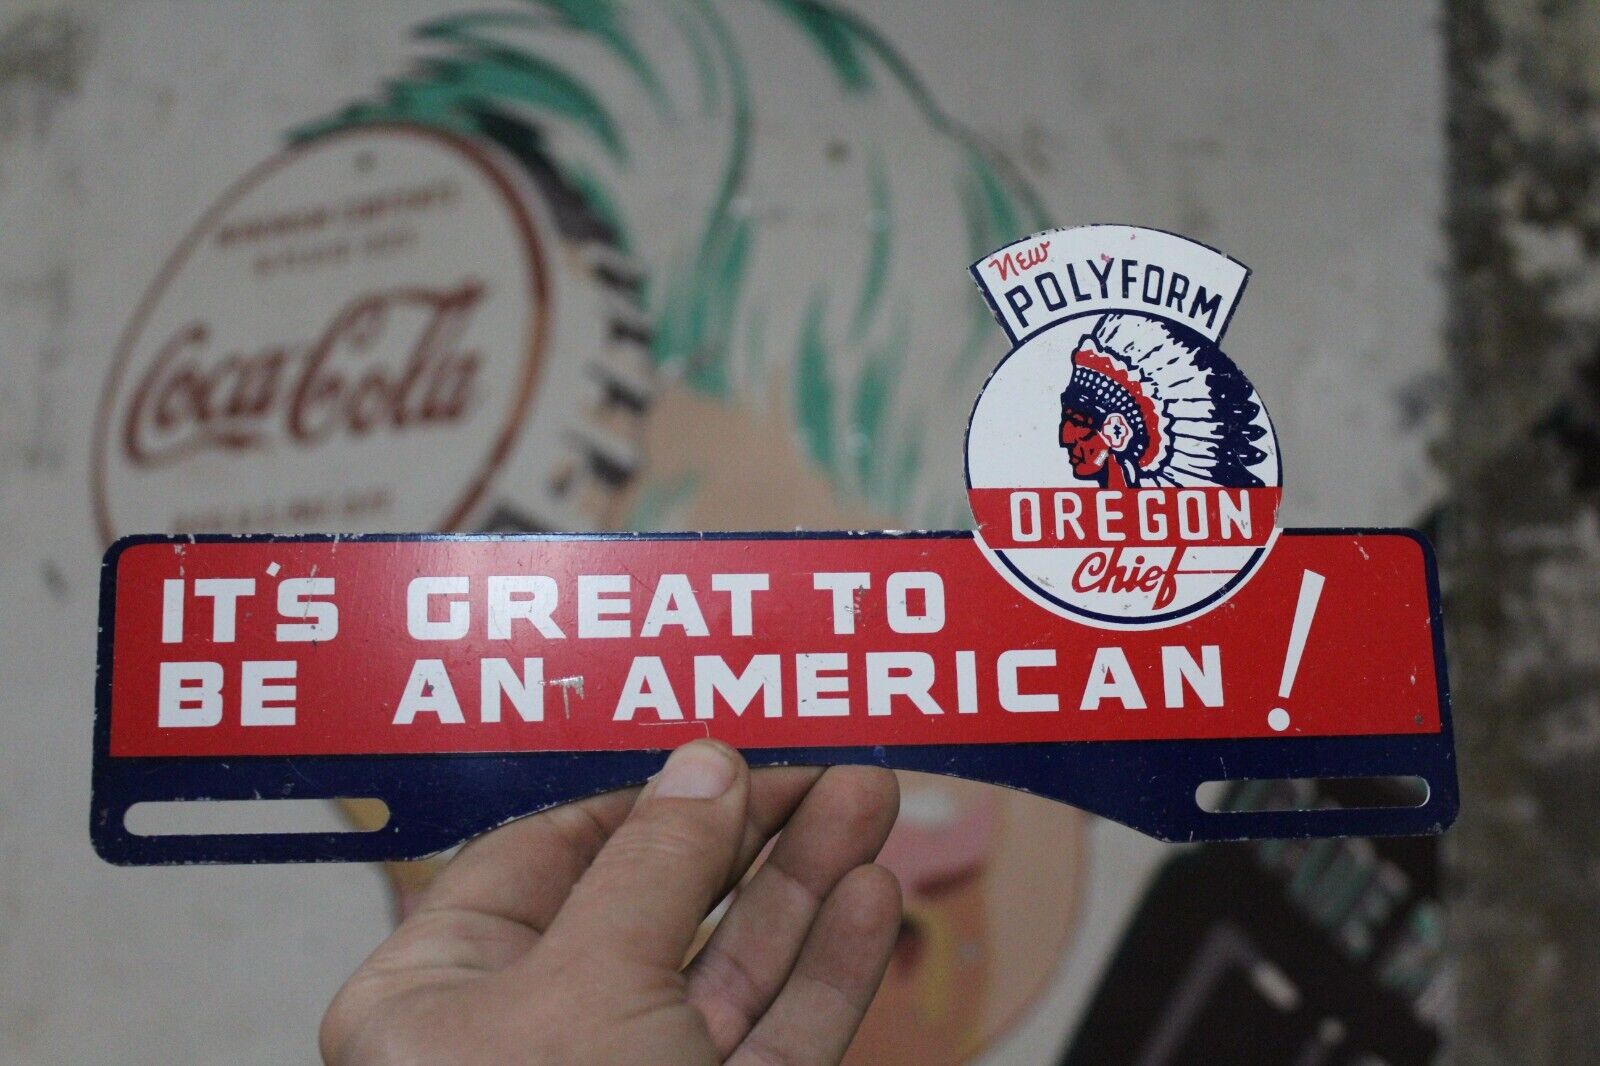 1950s ITS GREAT TO BE AMERICAN POLYFORM OREGON CHIEF PAINTED METAL TOPPER SIGN